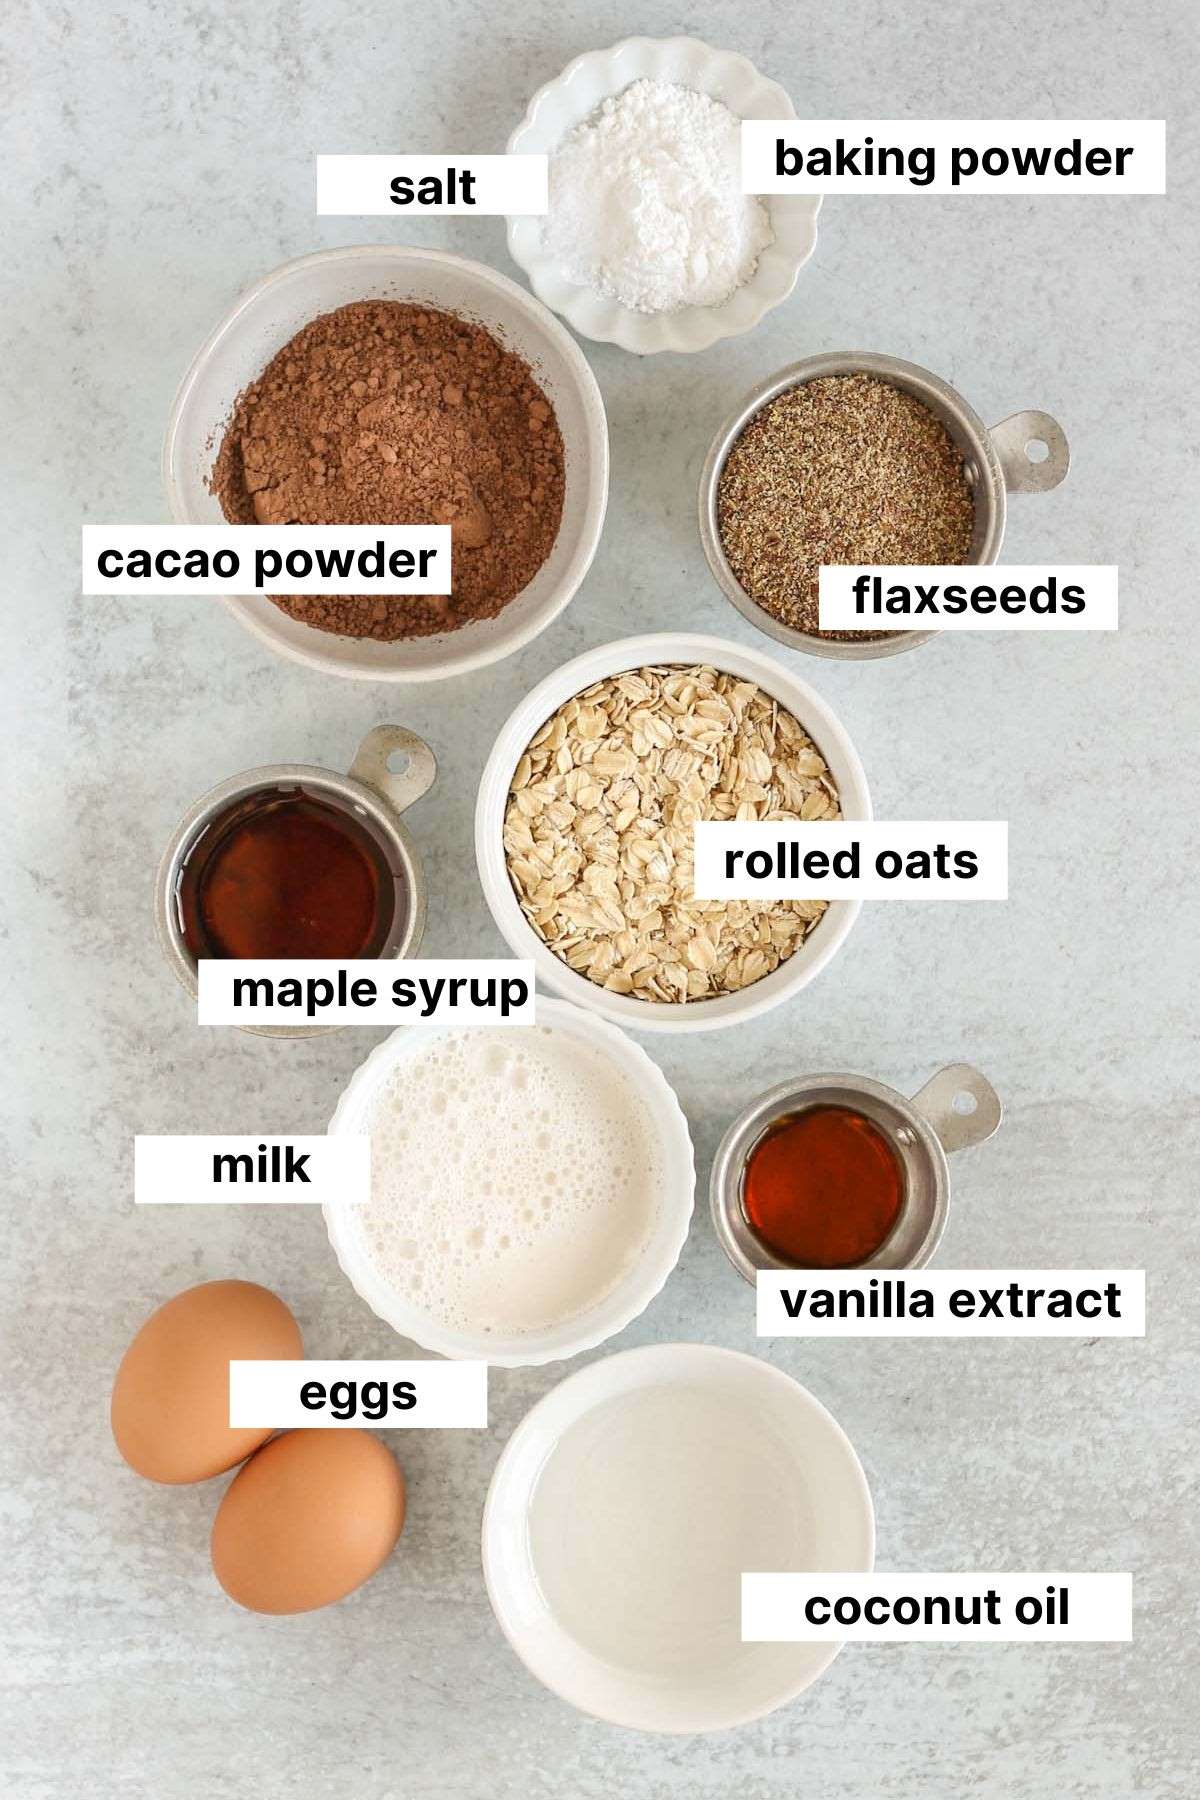 Labeled ingredients for chocolate baked oatmeal.